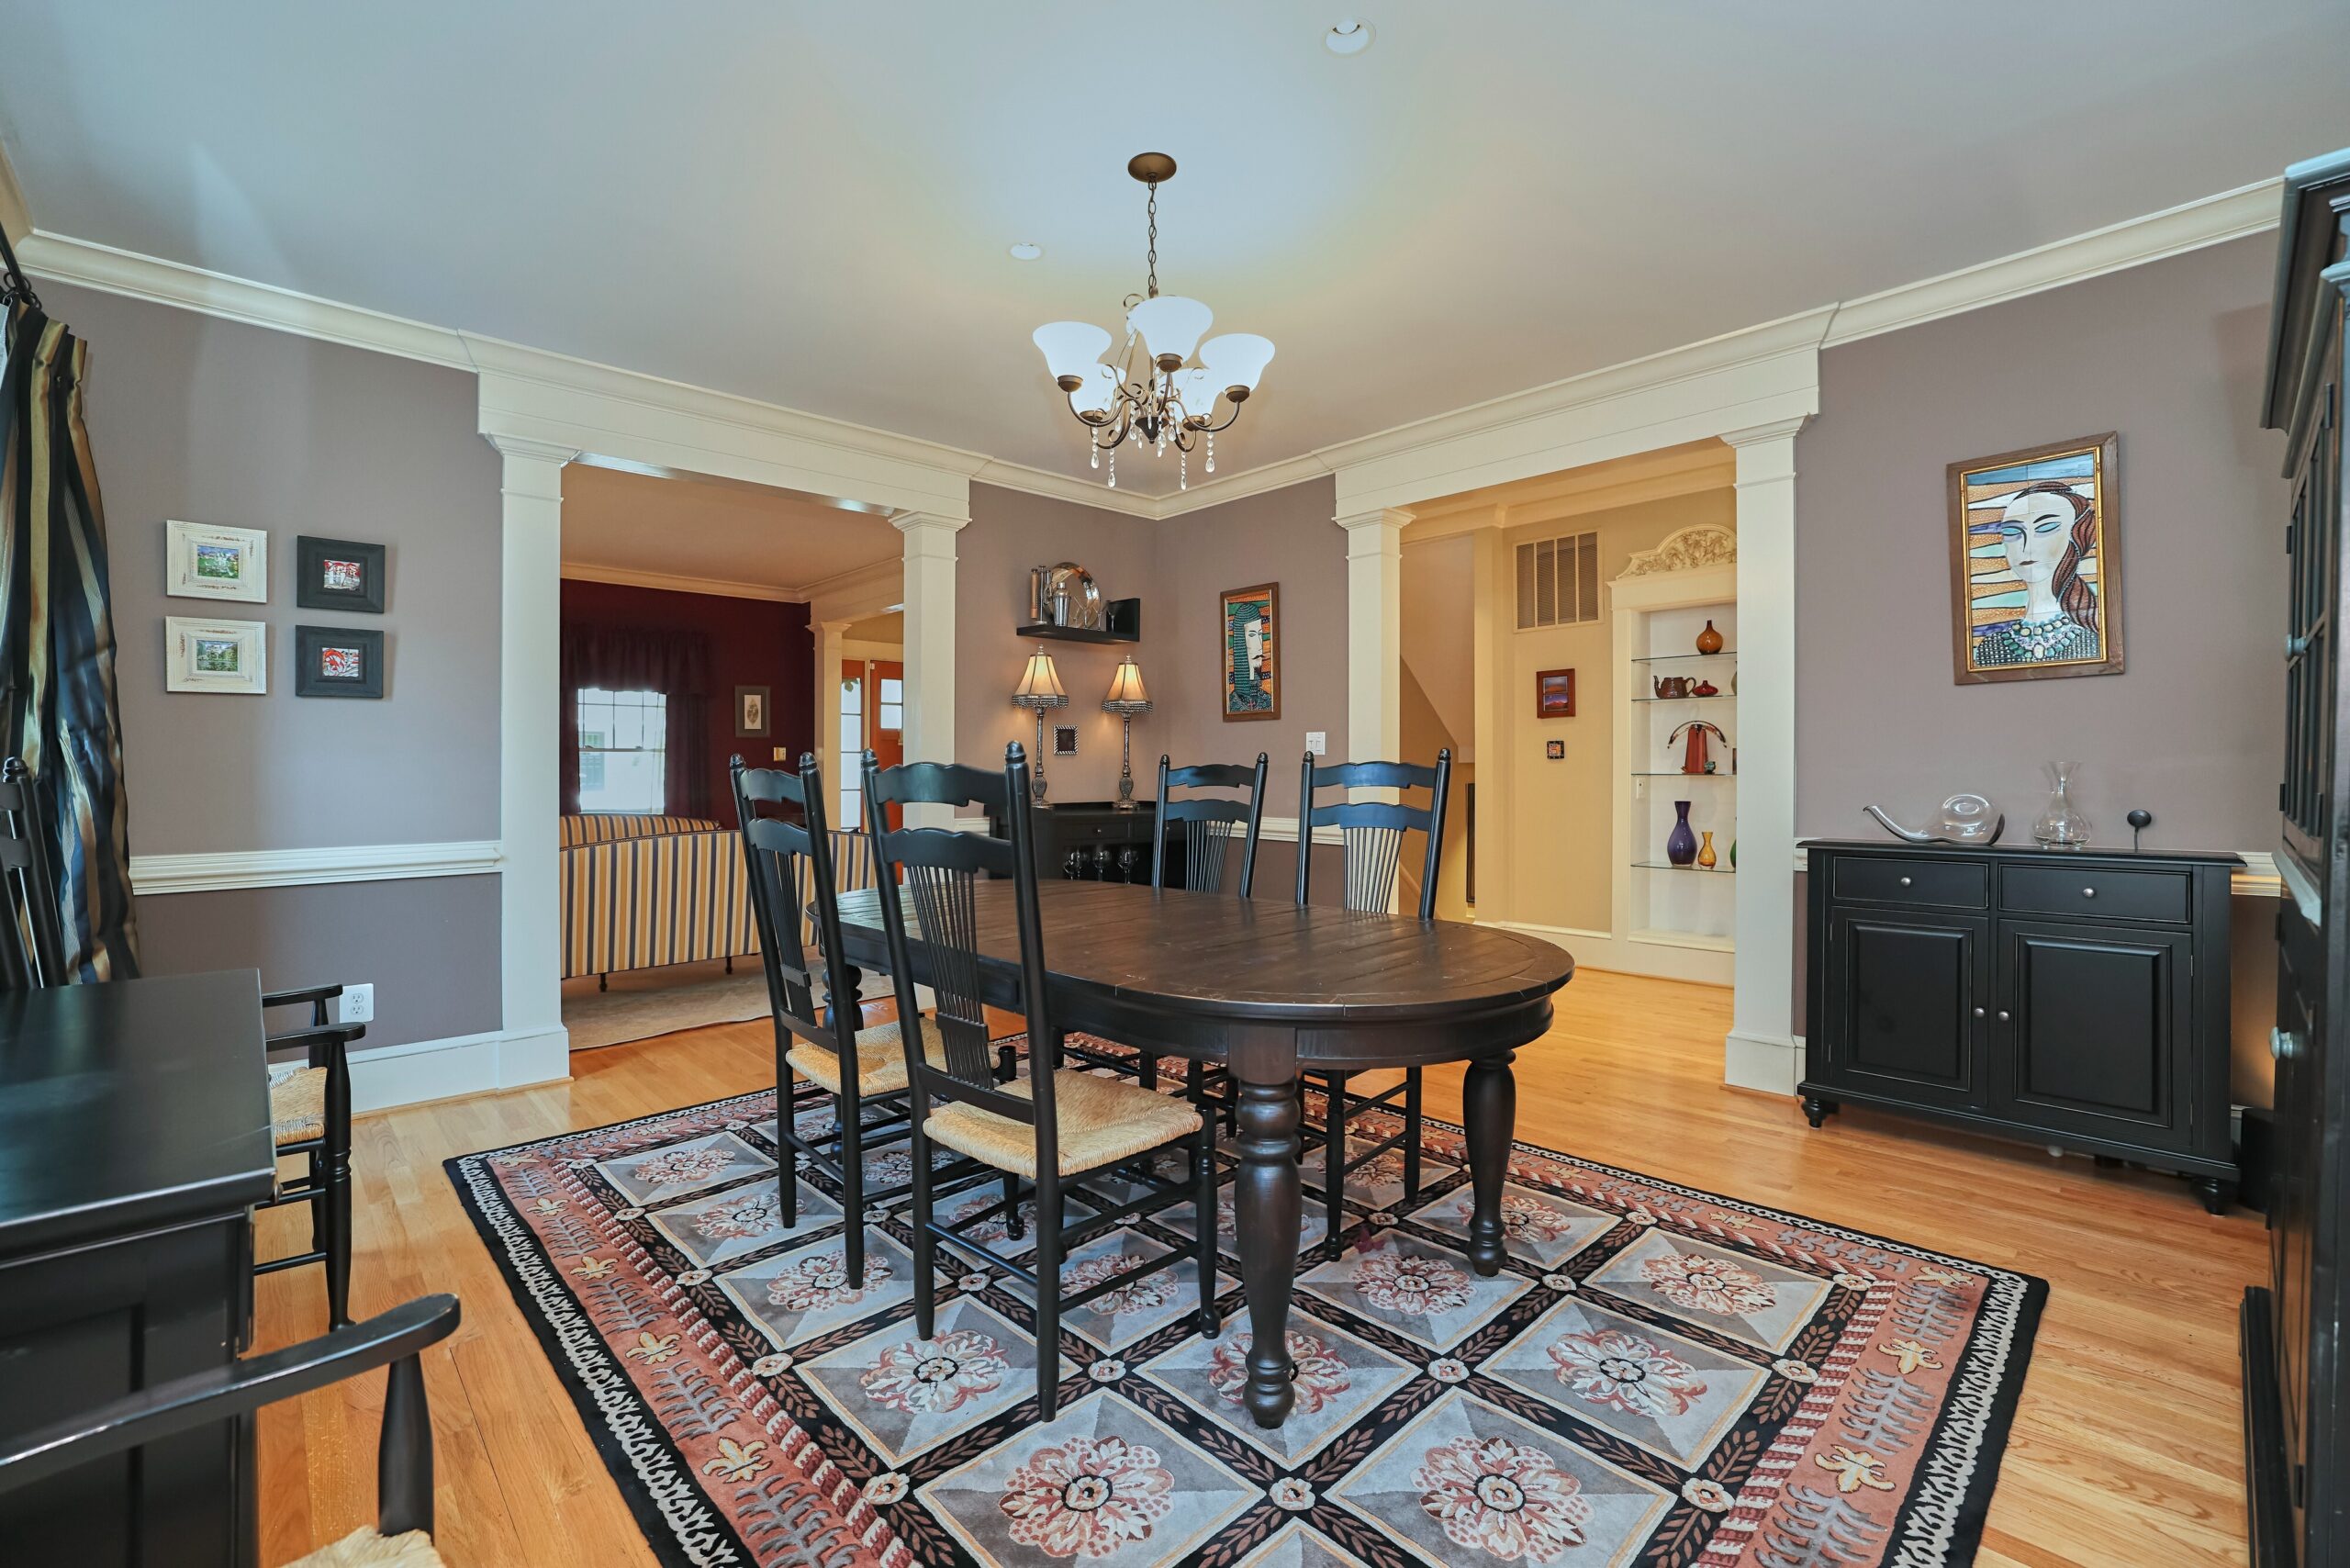 Professional interior photo of 819 N Fillmore St - Showing the dining room with grey walls and black wood furniture and hardwood floors